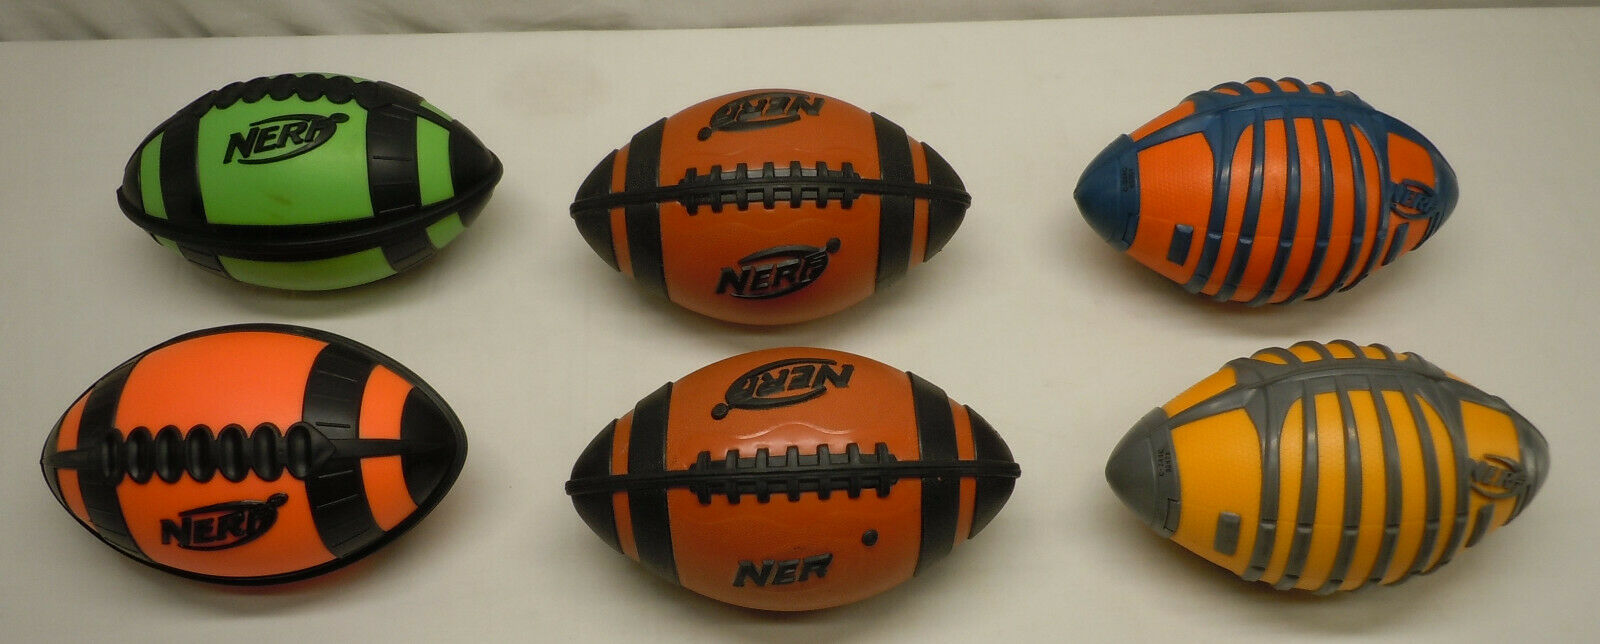 6 Nerf Weather Blitz Green Orange Brown Yellow All Weather Sports Football Lot